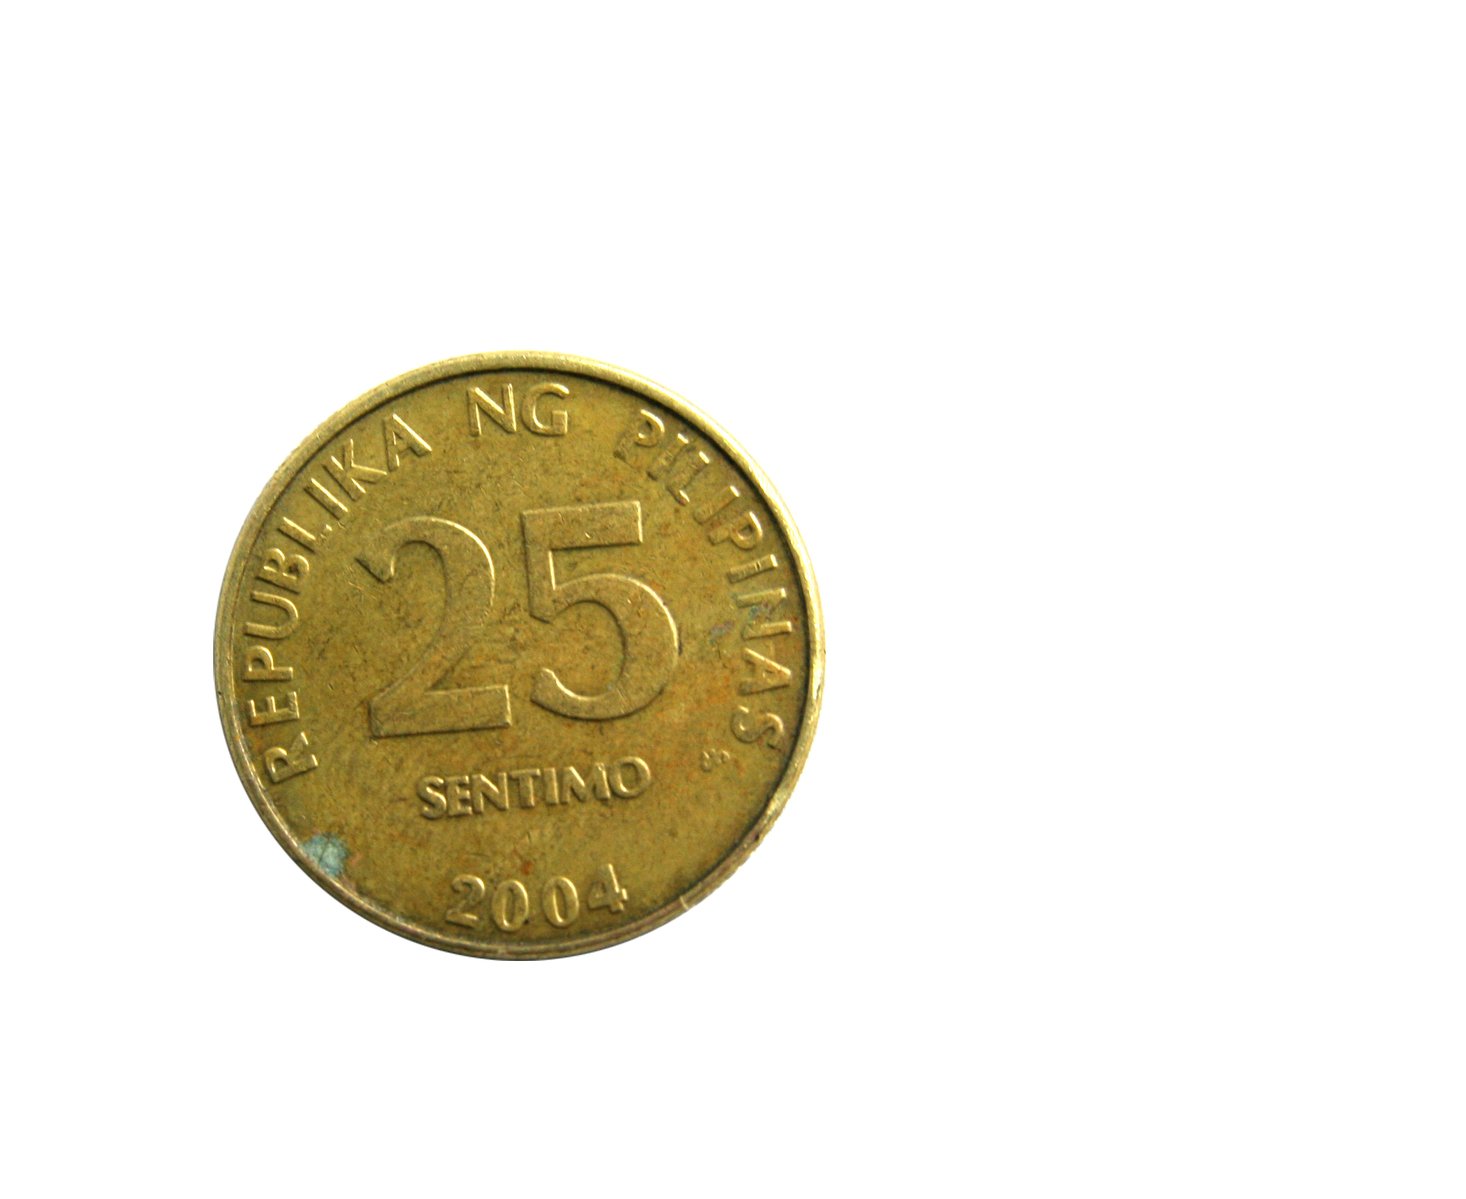 a gold commemorative coin on white background